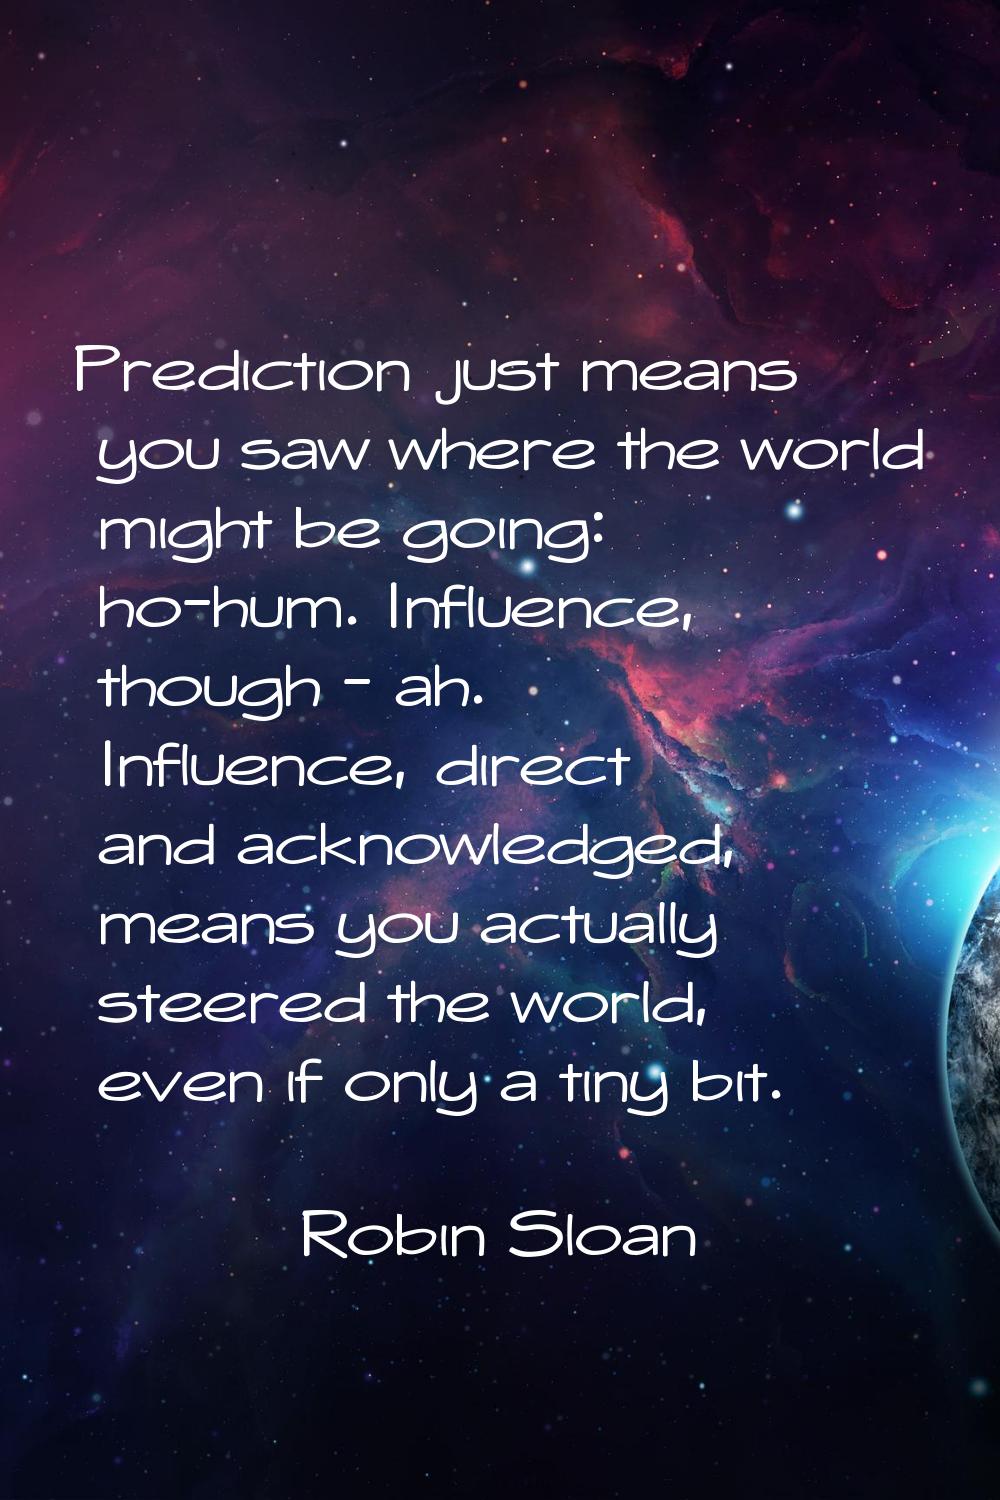 Prediction just means you saw where the world might be going: ho-hum. Influence, though - ah. Influ